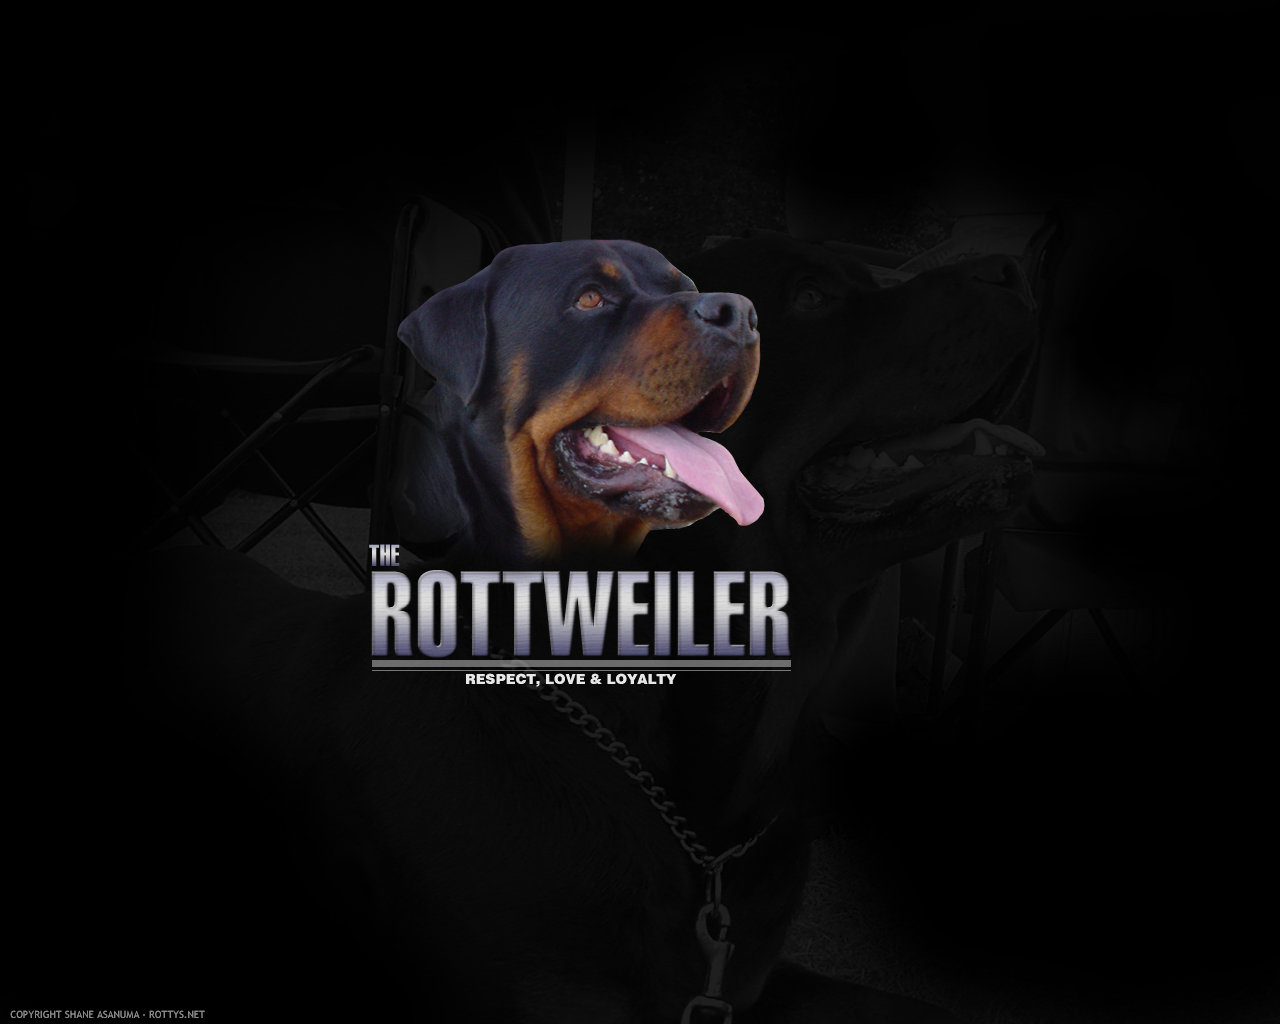 The Rottweiler by n3lly on